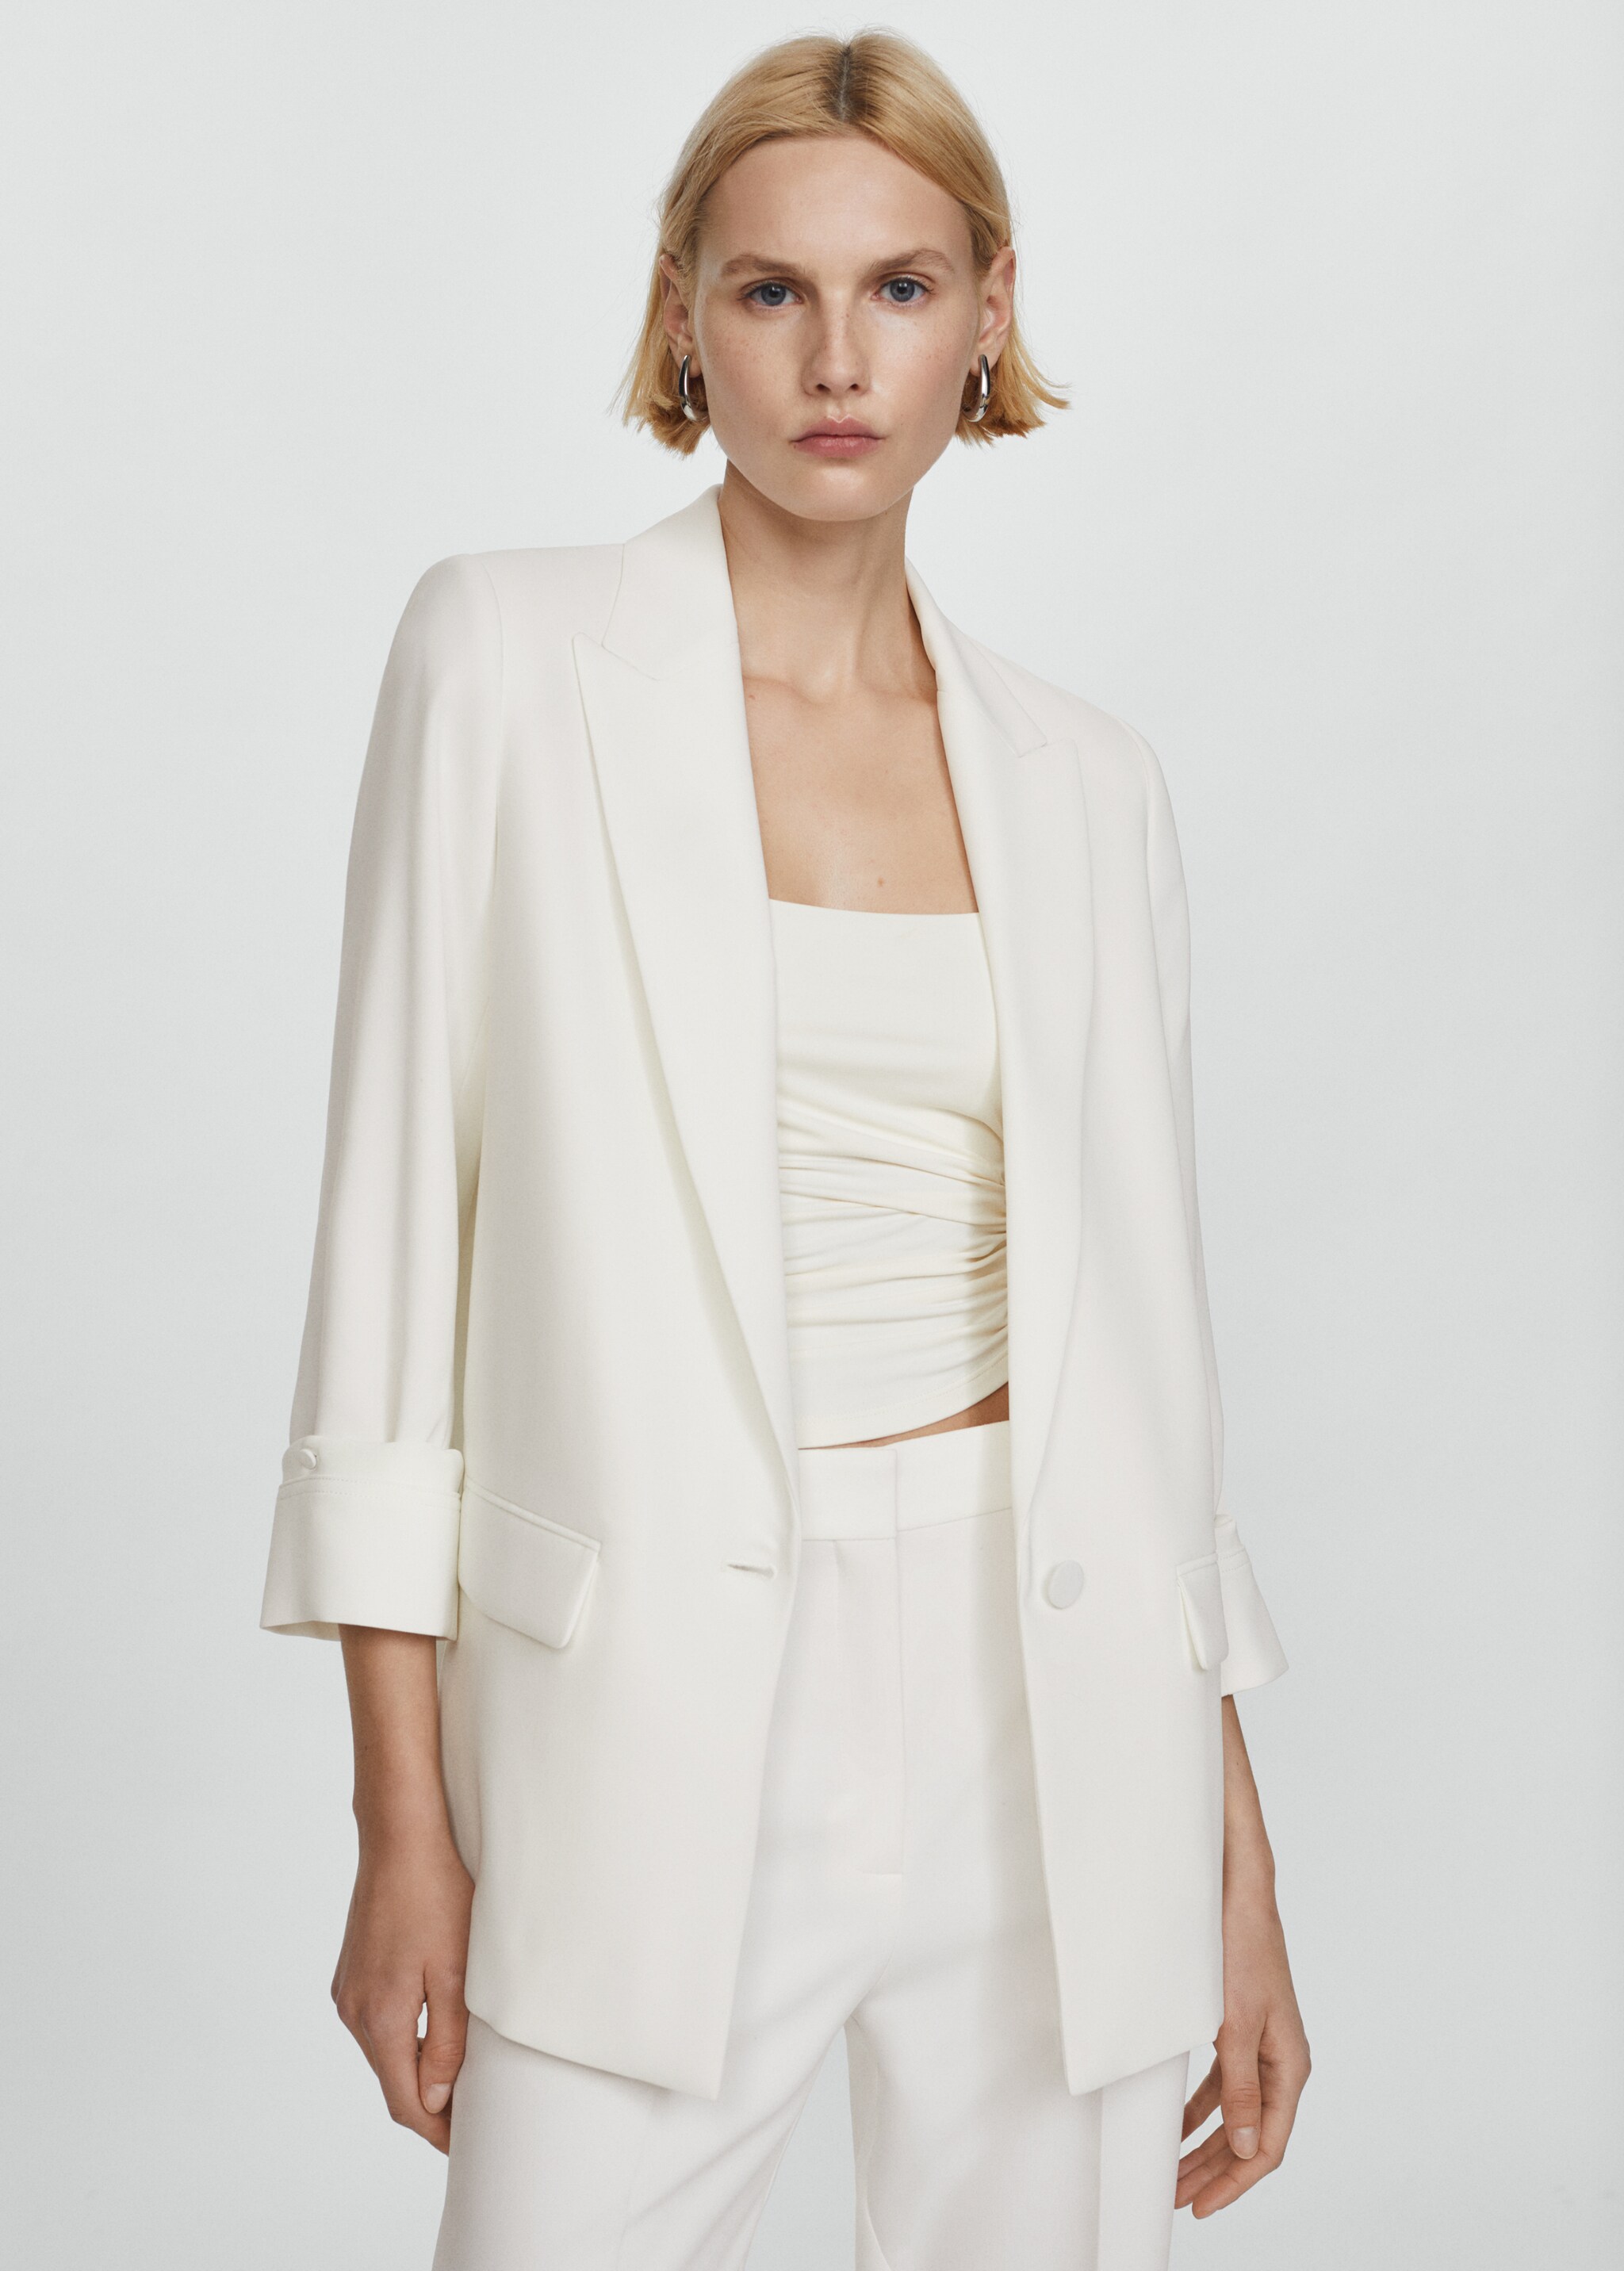 Tailored jacket with turn-down sleeves  - Medium plane